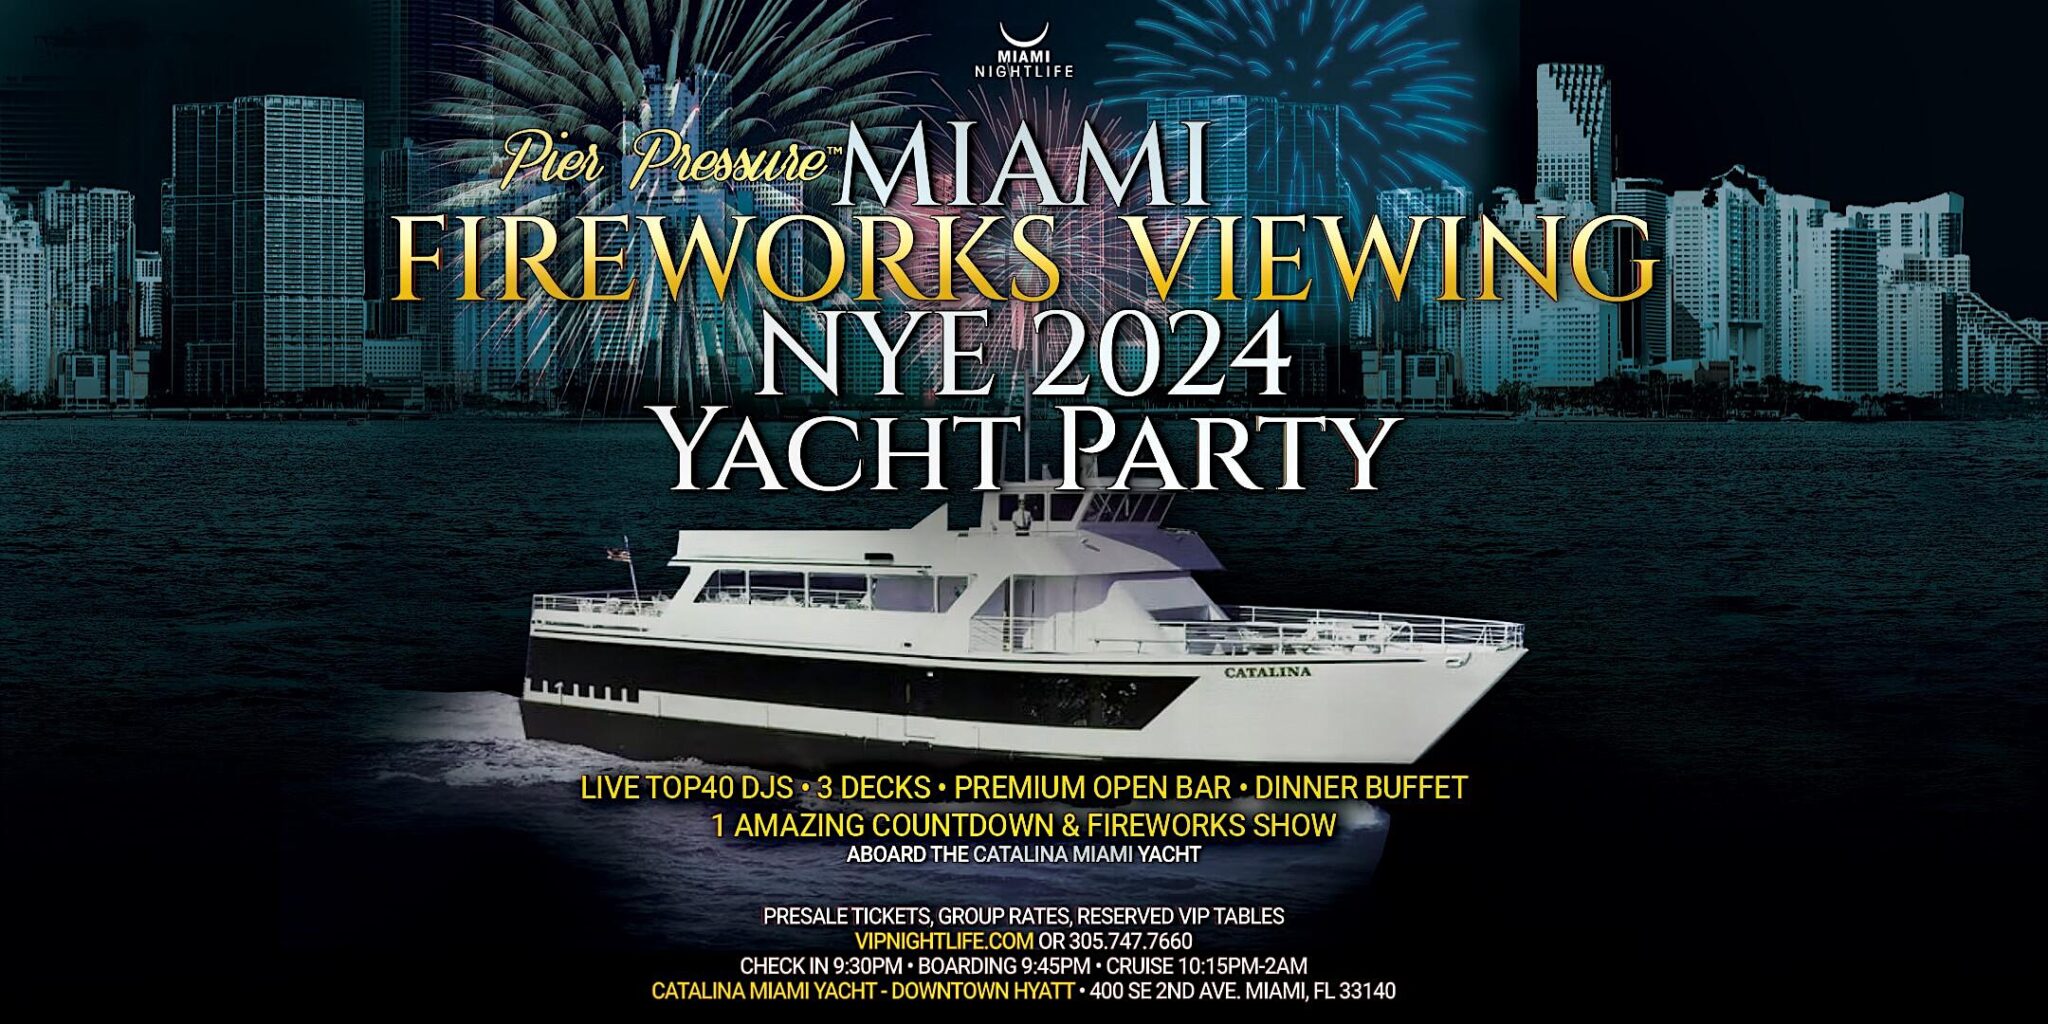 Miami Fireworks Viewing Pier Pressure New Year's Eve Yacht Party 2024